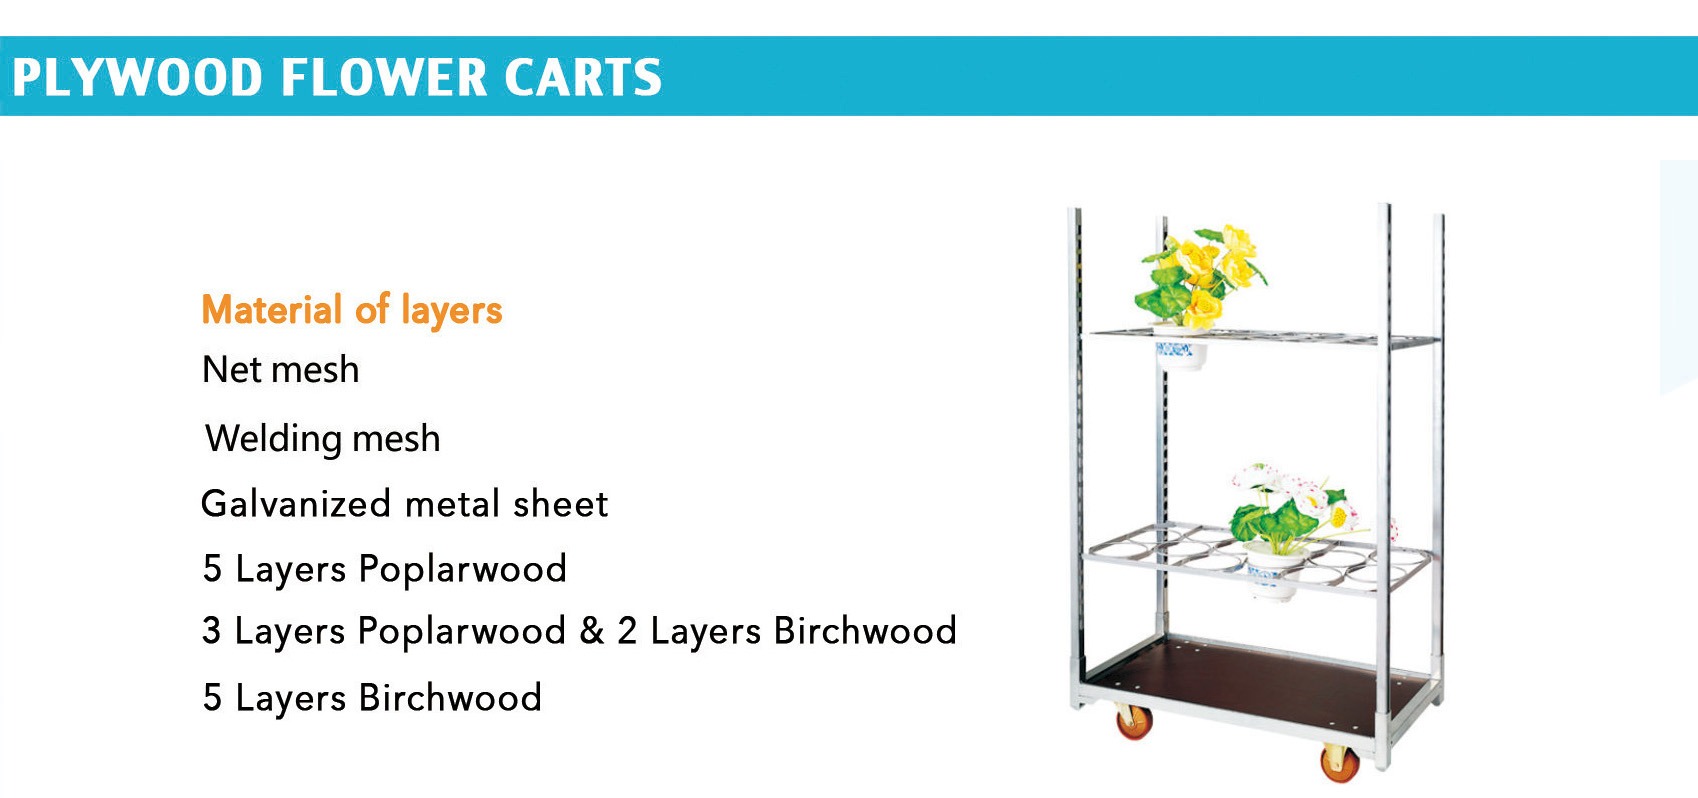 Plywood Flower Carts